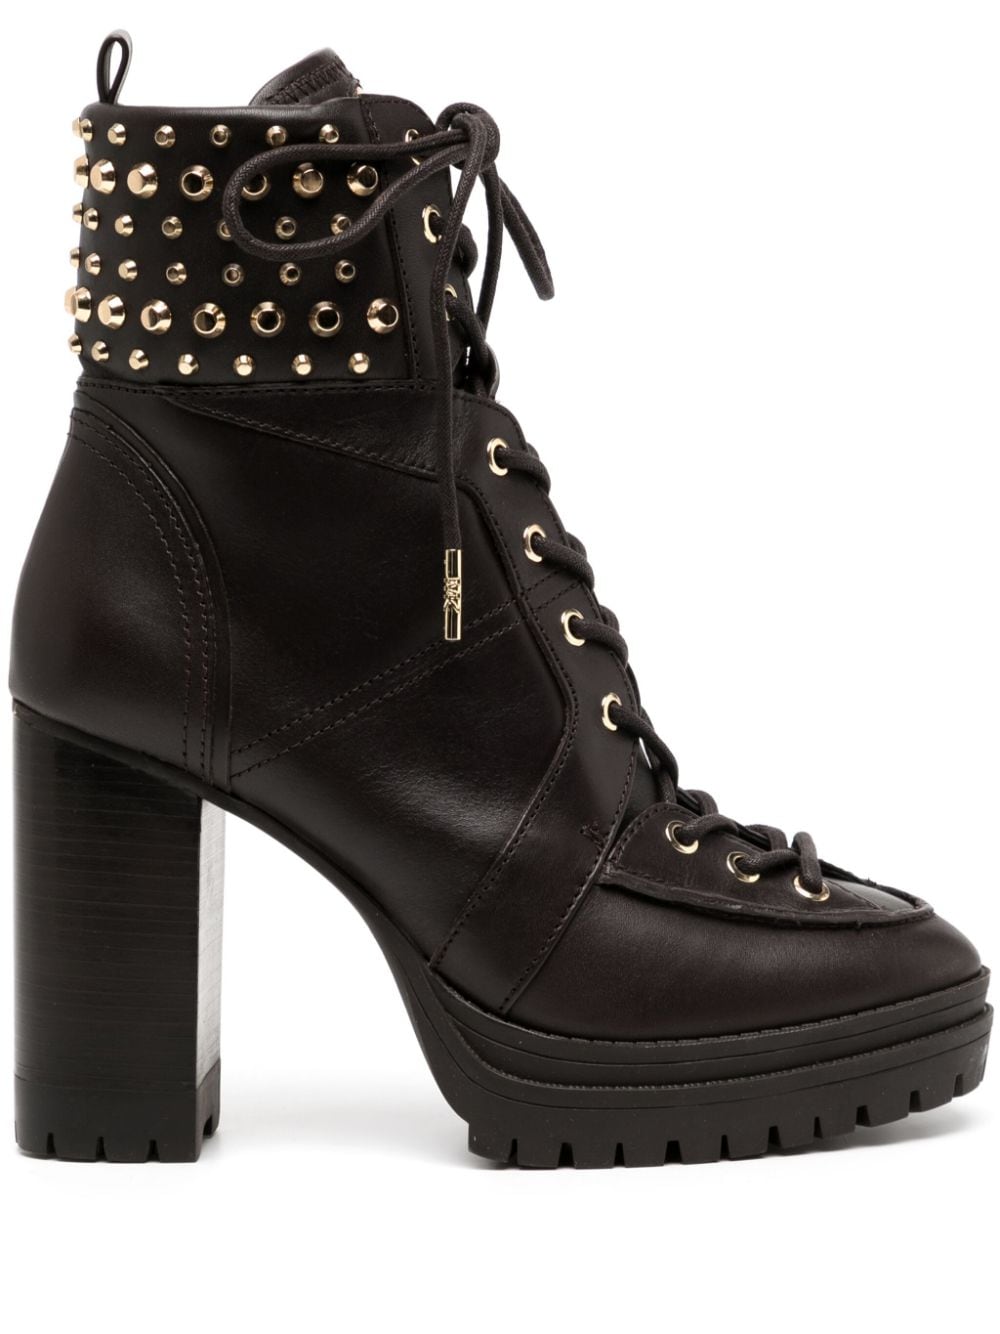 Michael Kors Yvonne 100mm studded leather boots - Marrone